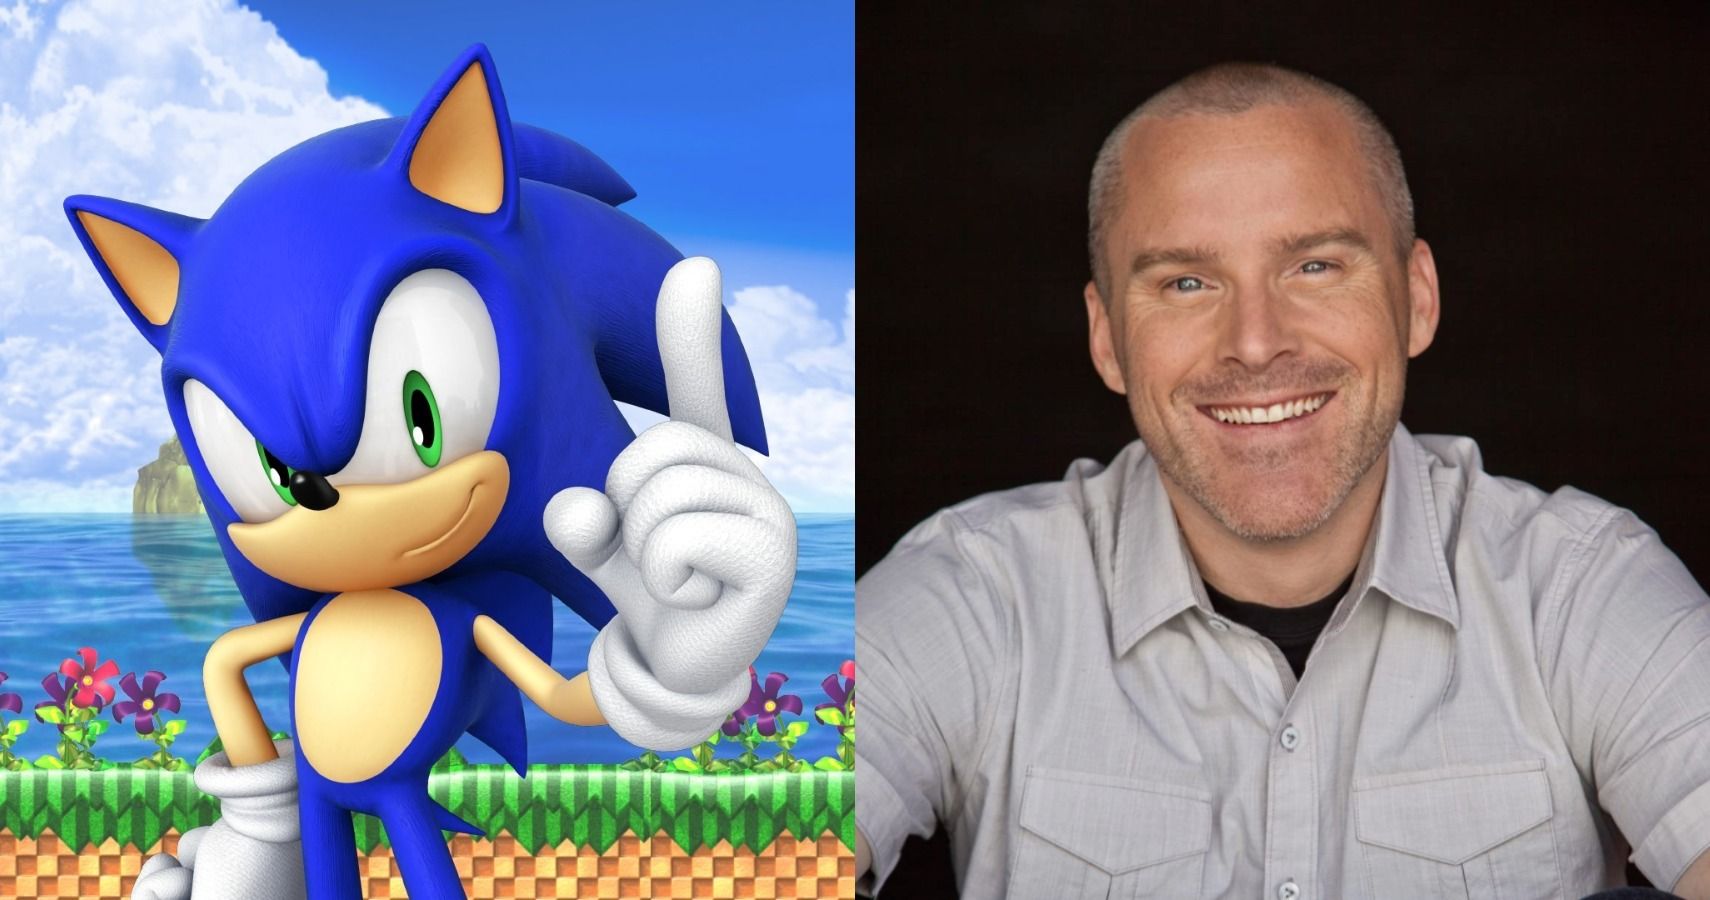 who does roger craig smith voice